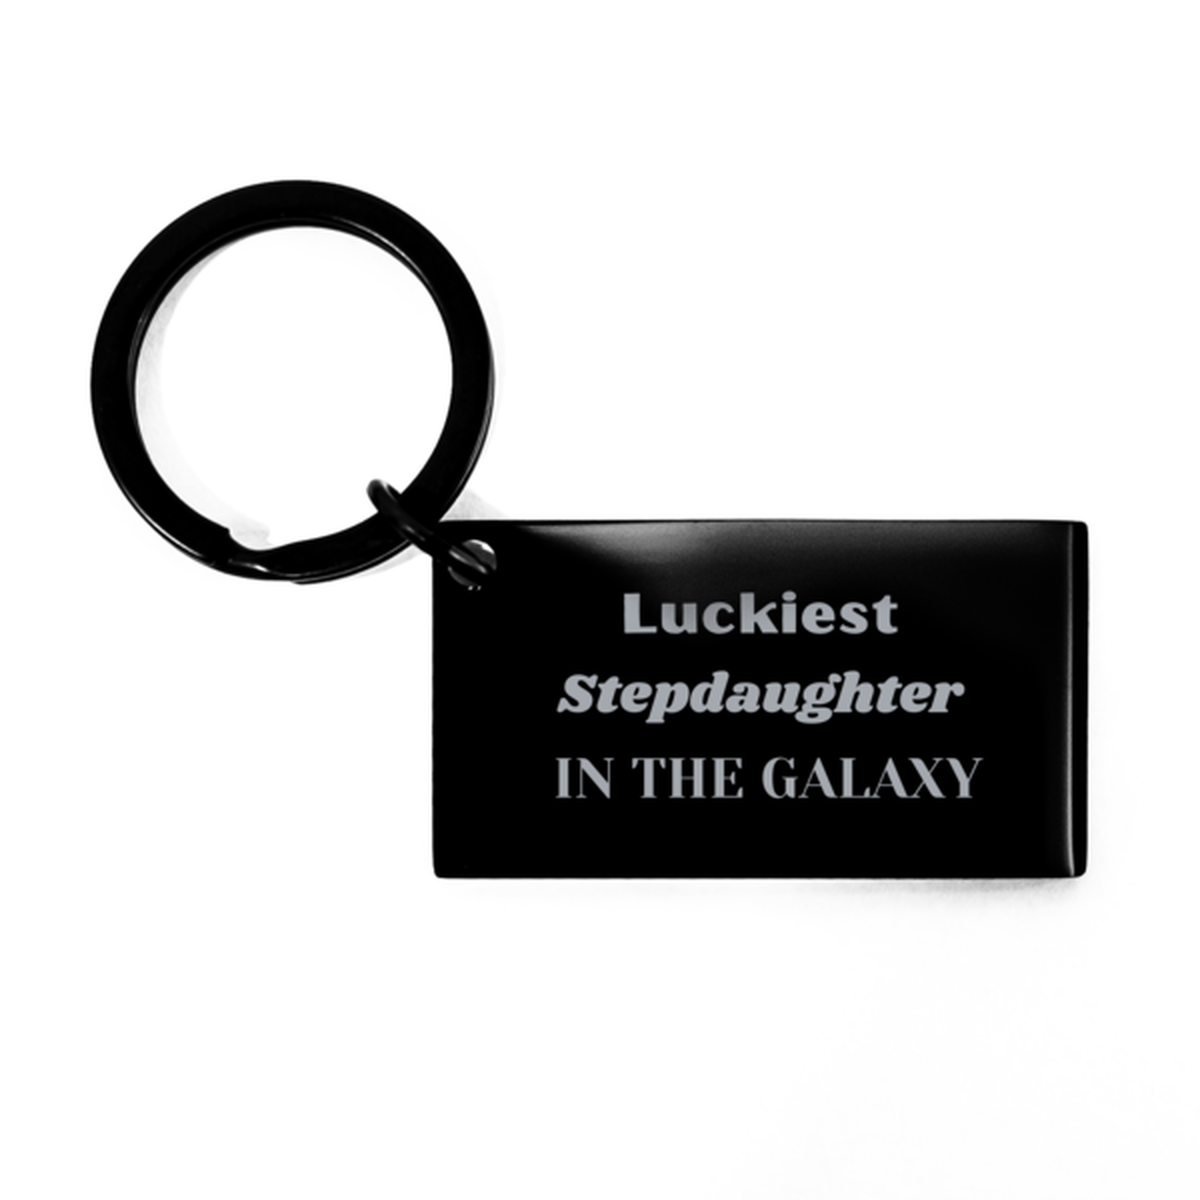 Luckiest Stepdaughter in the Galaxy, To My Stepdaughter Engraved Gifts, Christmas Stepdaughter Keychain Gifts, X-mas Birthday Unique Gifts For Stepdaughter Men Women